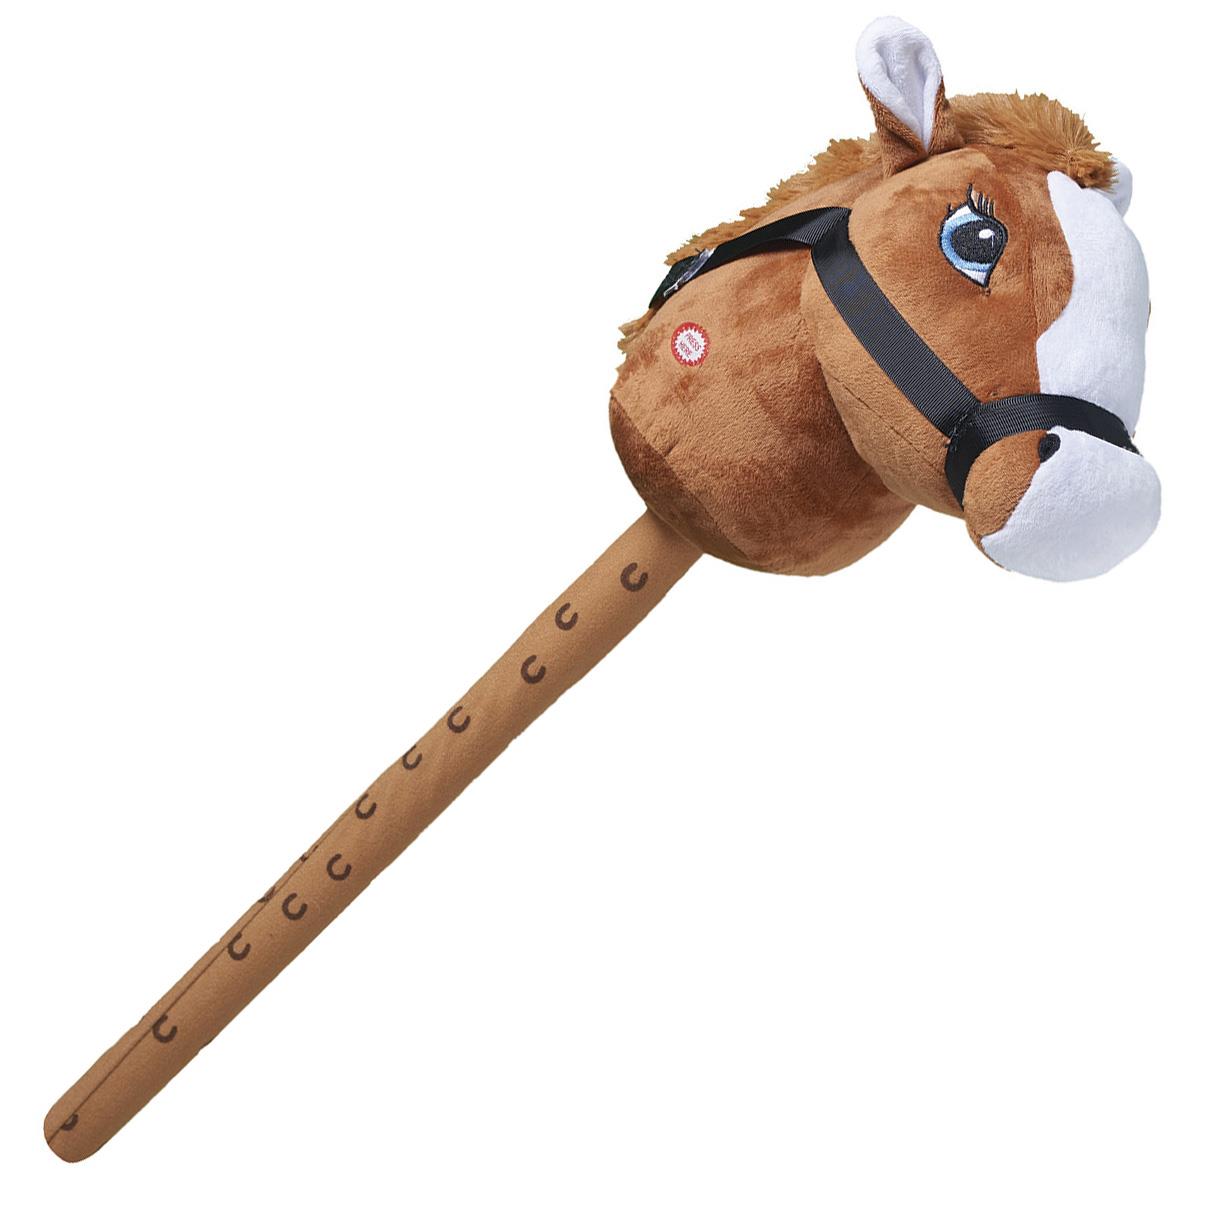 Brown Hobby Horse by The Magic Toy Shop - The Magic Toy Shop